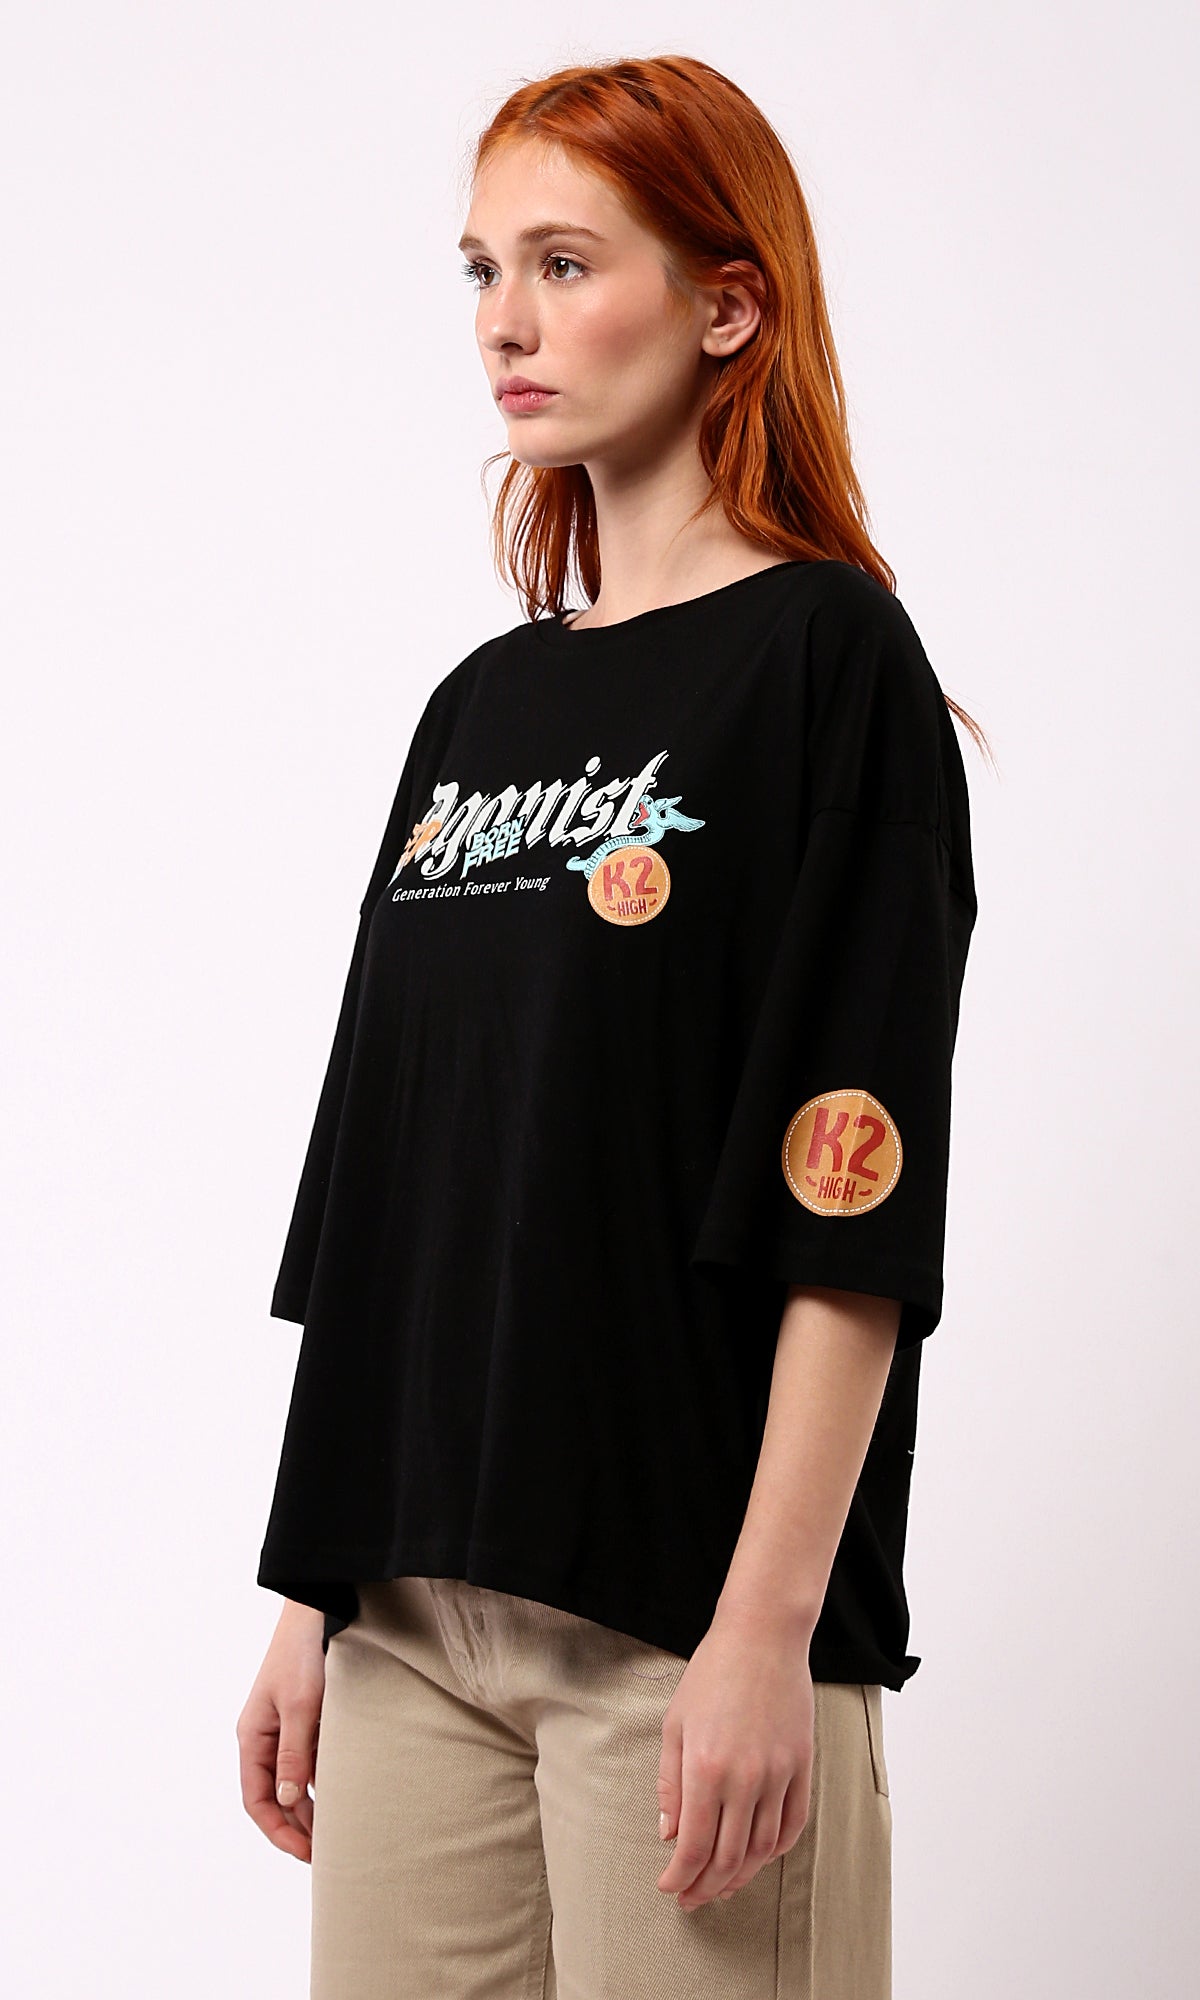 O179806 "Against" Elbow Sleeves Relaxed Black Tee